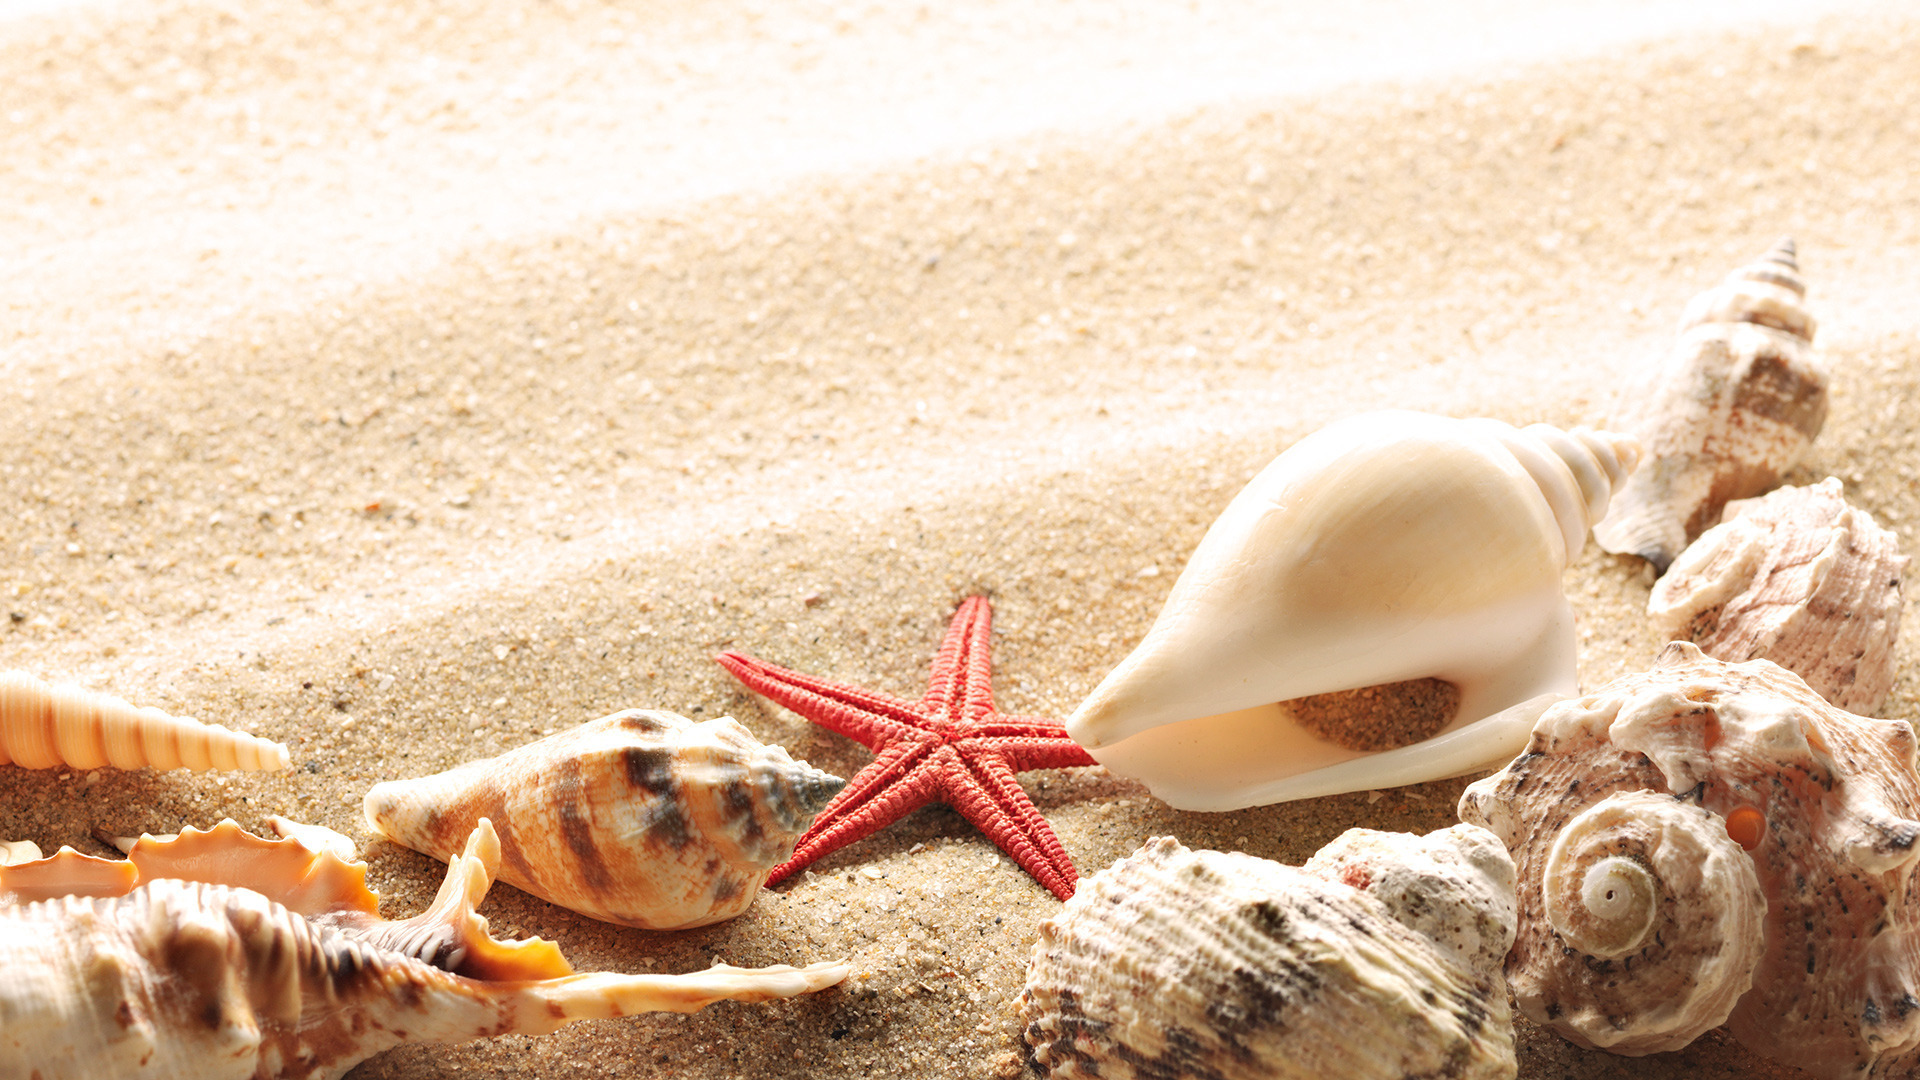 Seashells On The Beach In Summer Wallpaper And Image